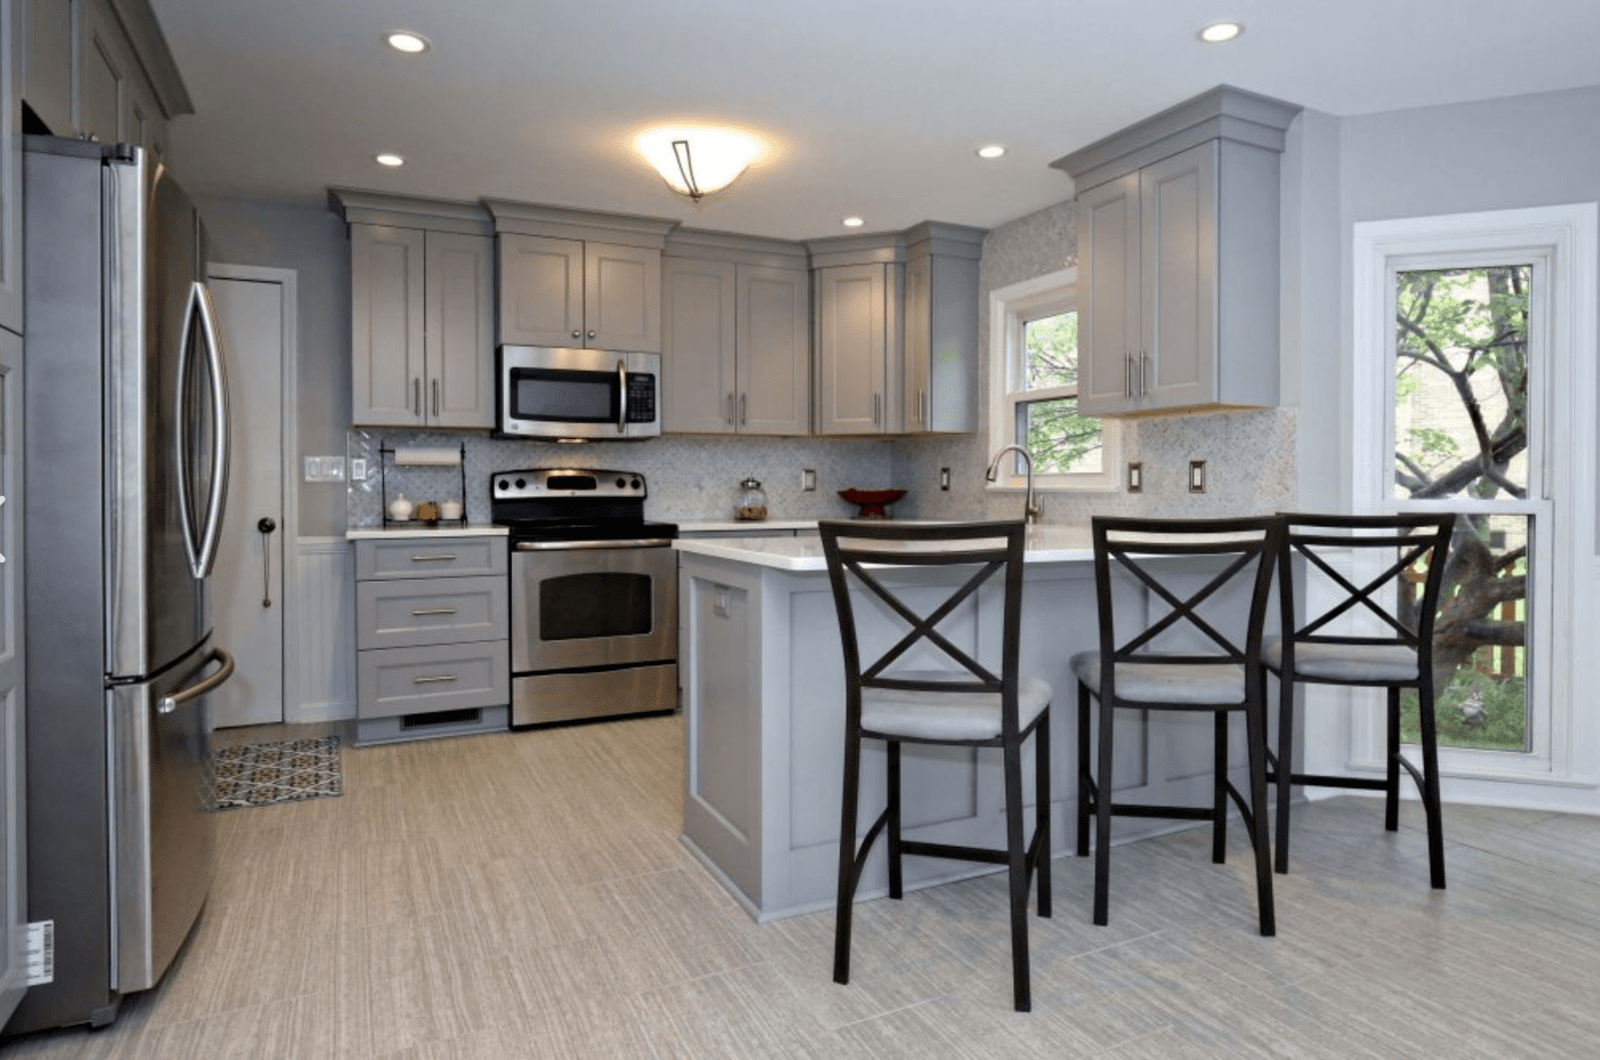 Large kitchen with light grey cabinets and breakfast bar with white countertop.